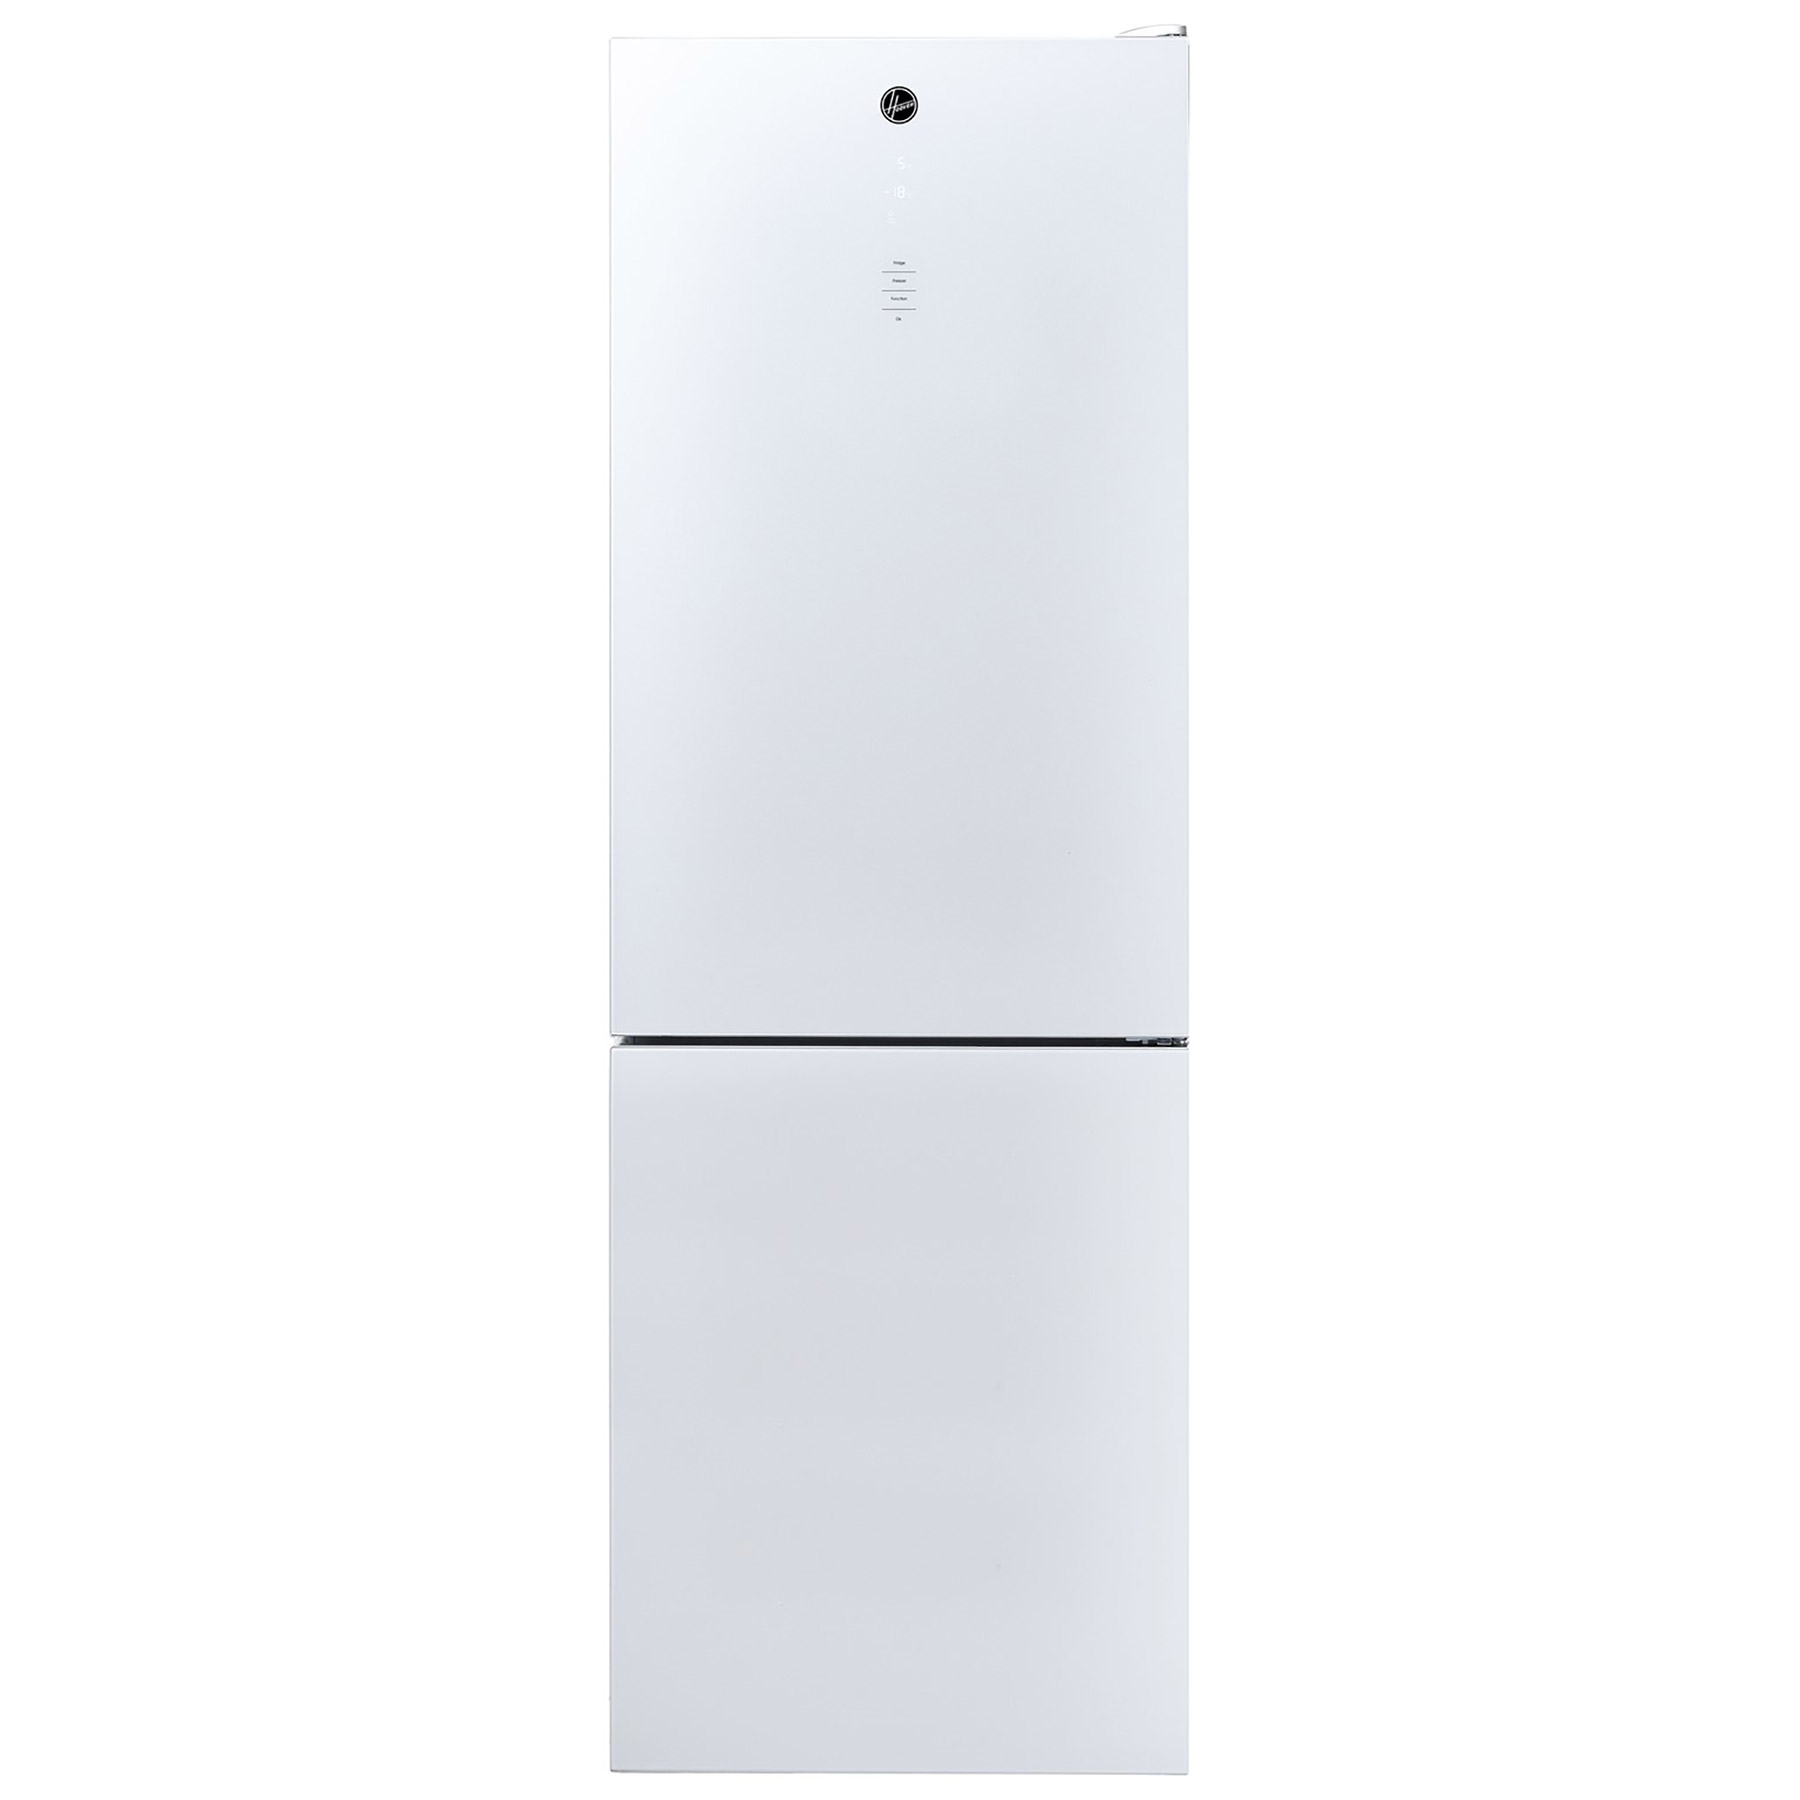 Hoover HFDG6182WN 60cm No Frost Fridge Freezer in White 1 86m F Rated